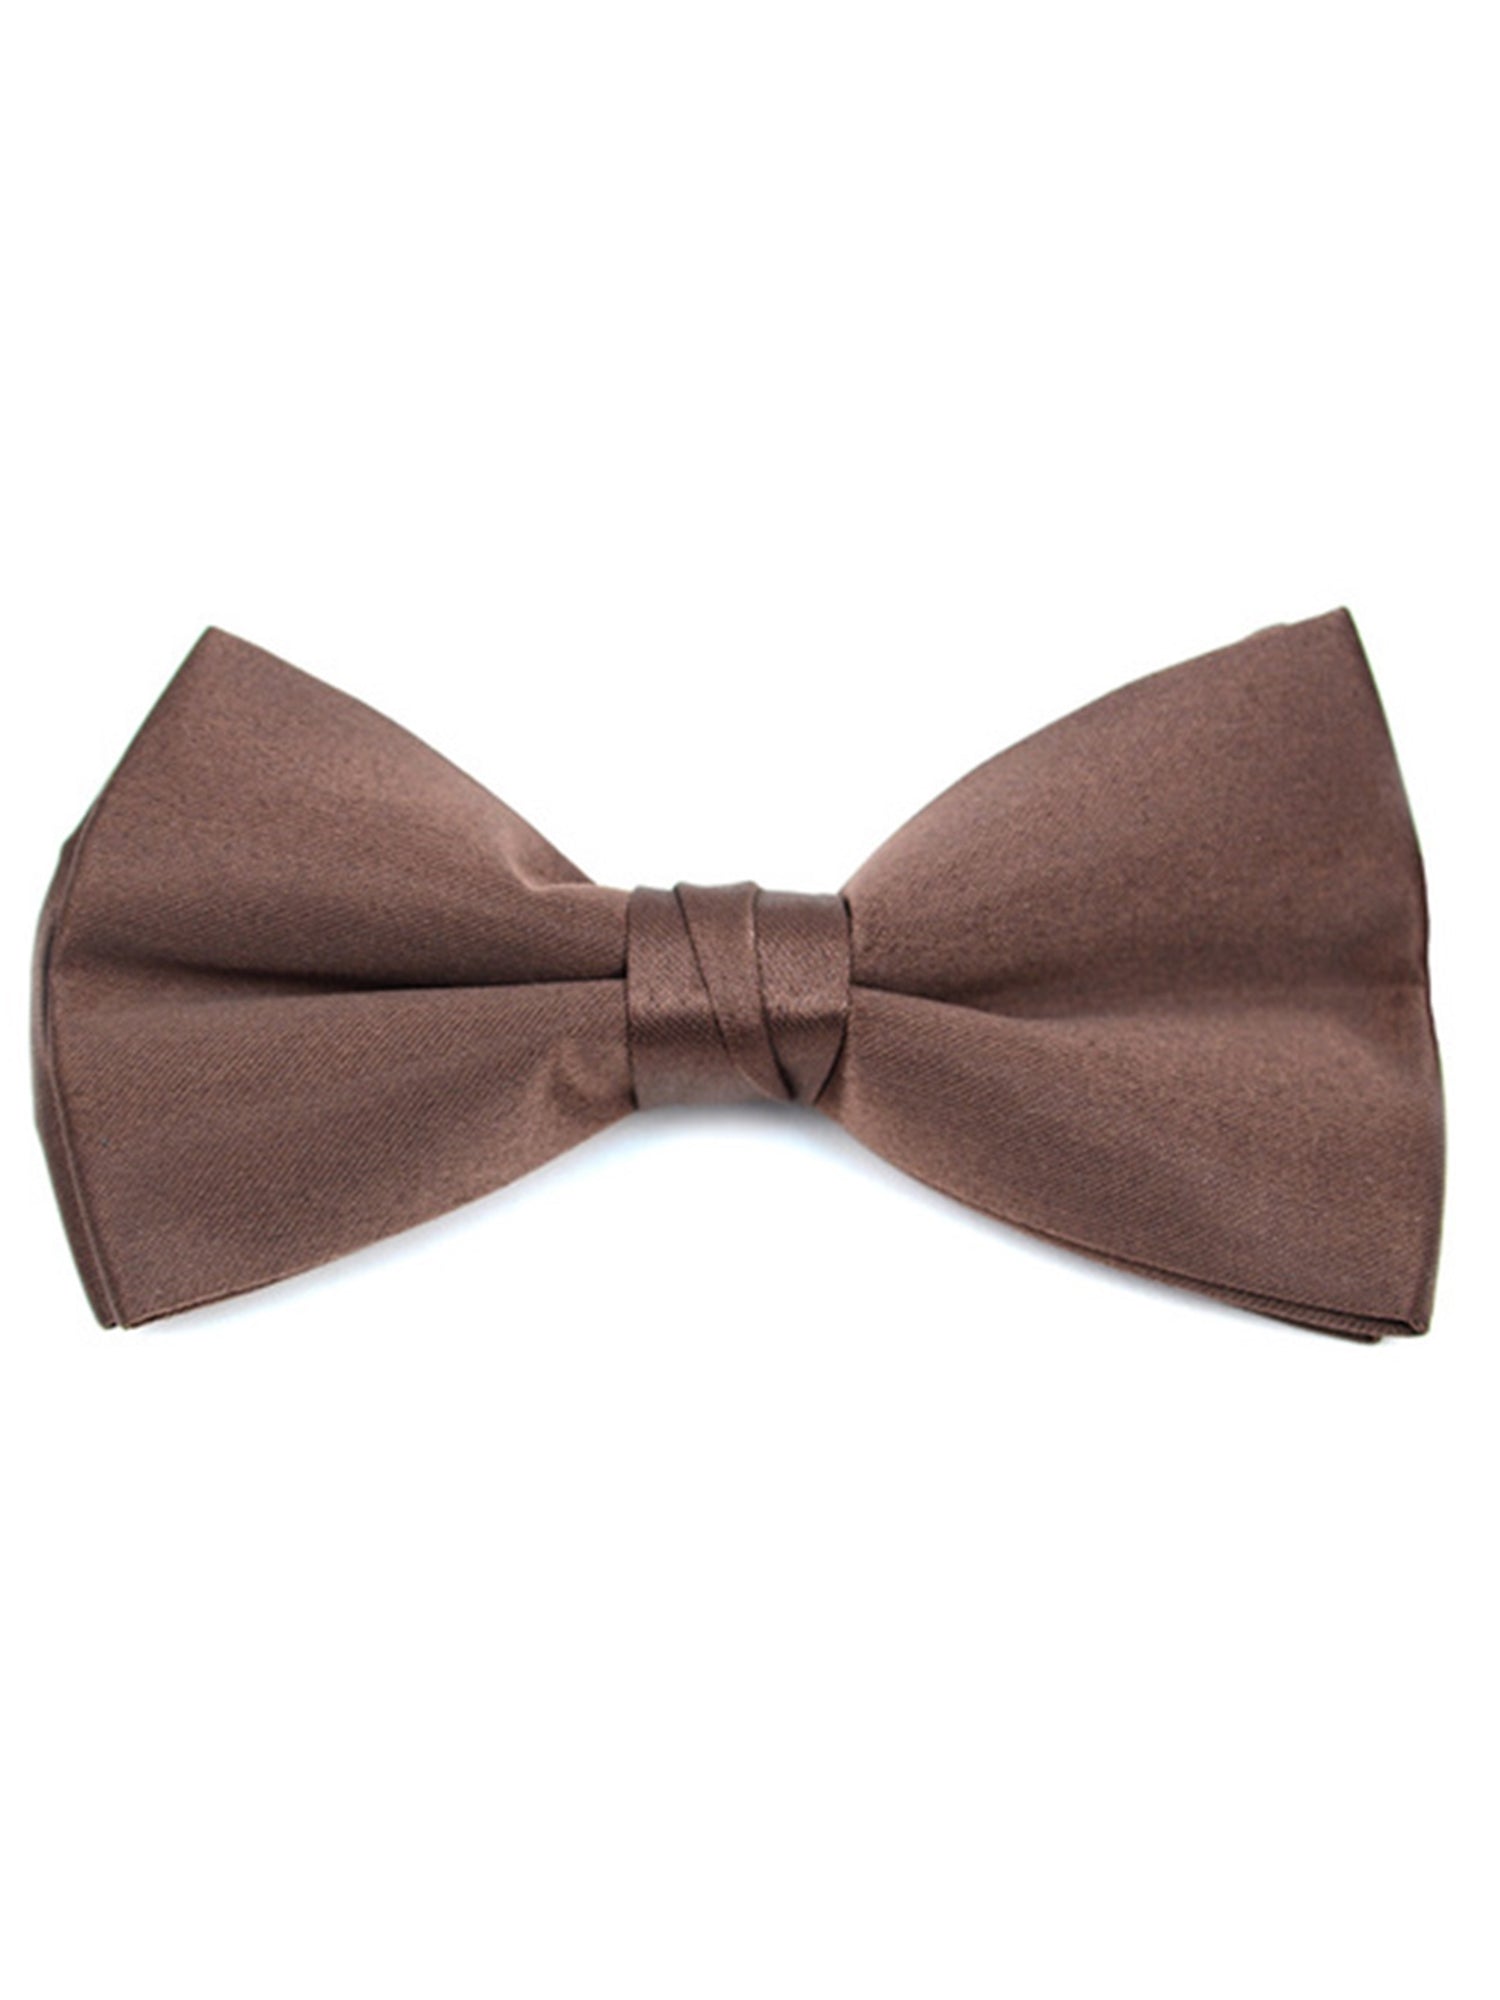 Young Boy's Pre-tied Adjustable Length Bow Tie - Formal Tuxedo Solid Color Boy's Solid Color Bow Tie TheDapperTie Brown One Size 